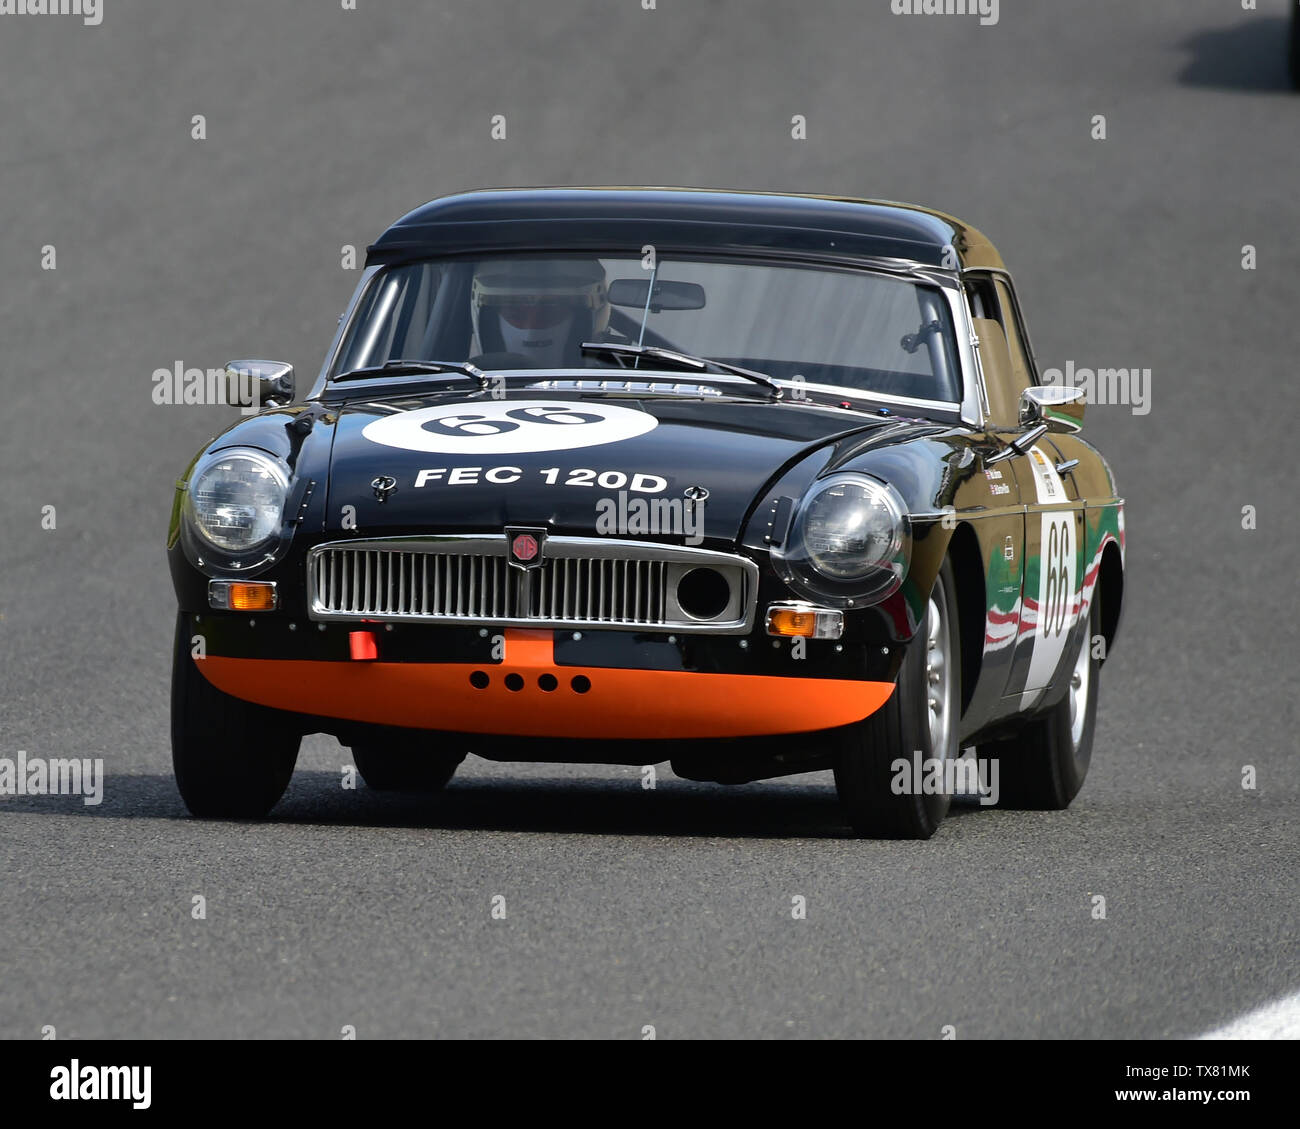 Rob Johnson, Ed Barton Hilton, MGB, Equipe GTS, Masters Historic Festival, Brands Hatch, May 2019. Brands Hatch, classic cars, classic event, Classic Stock Photo